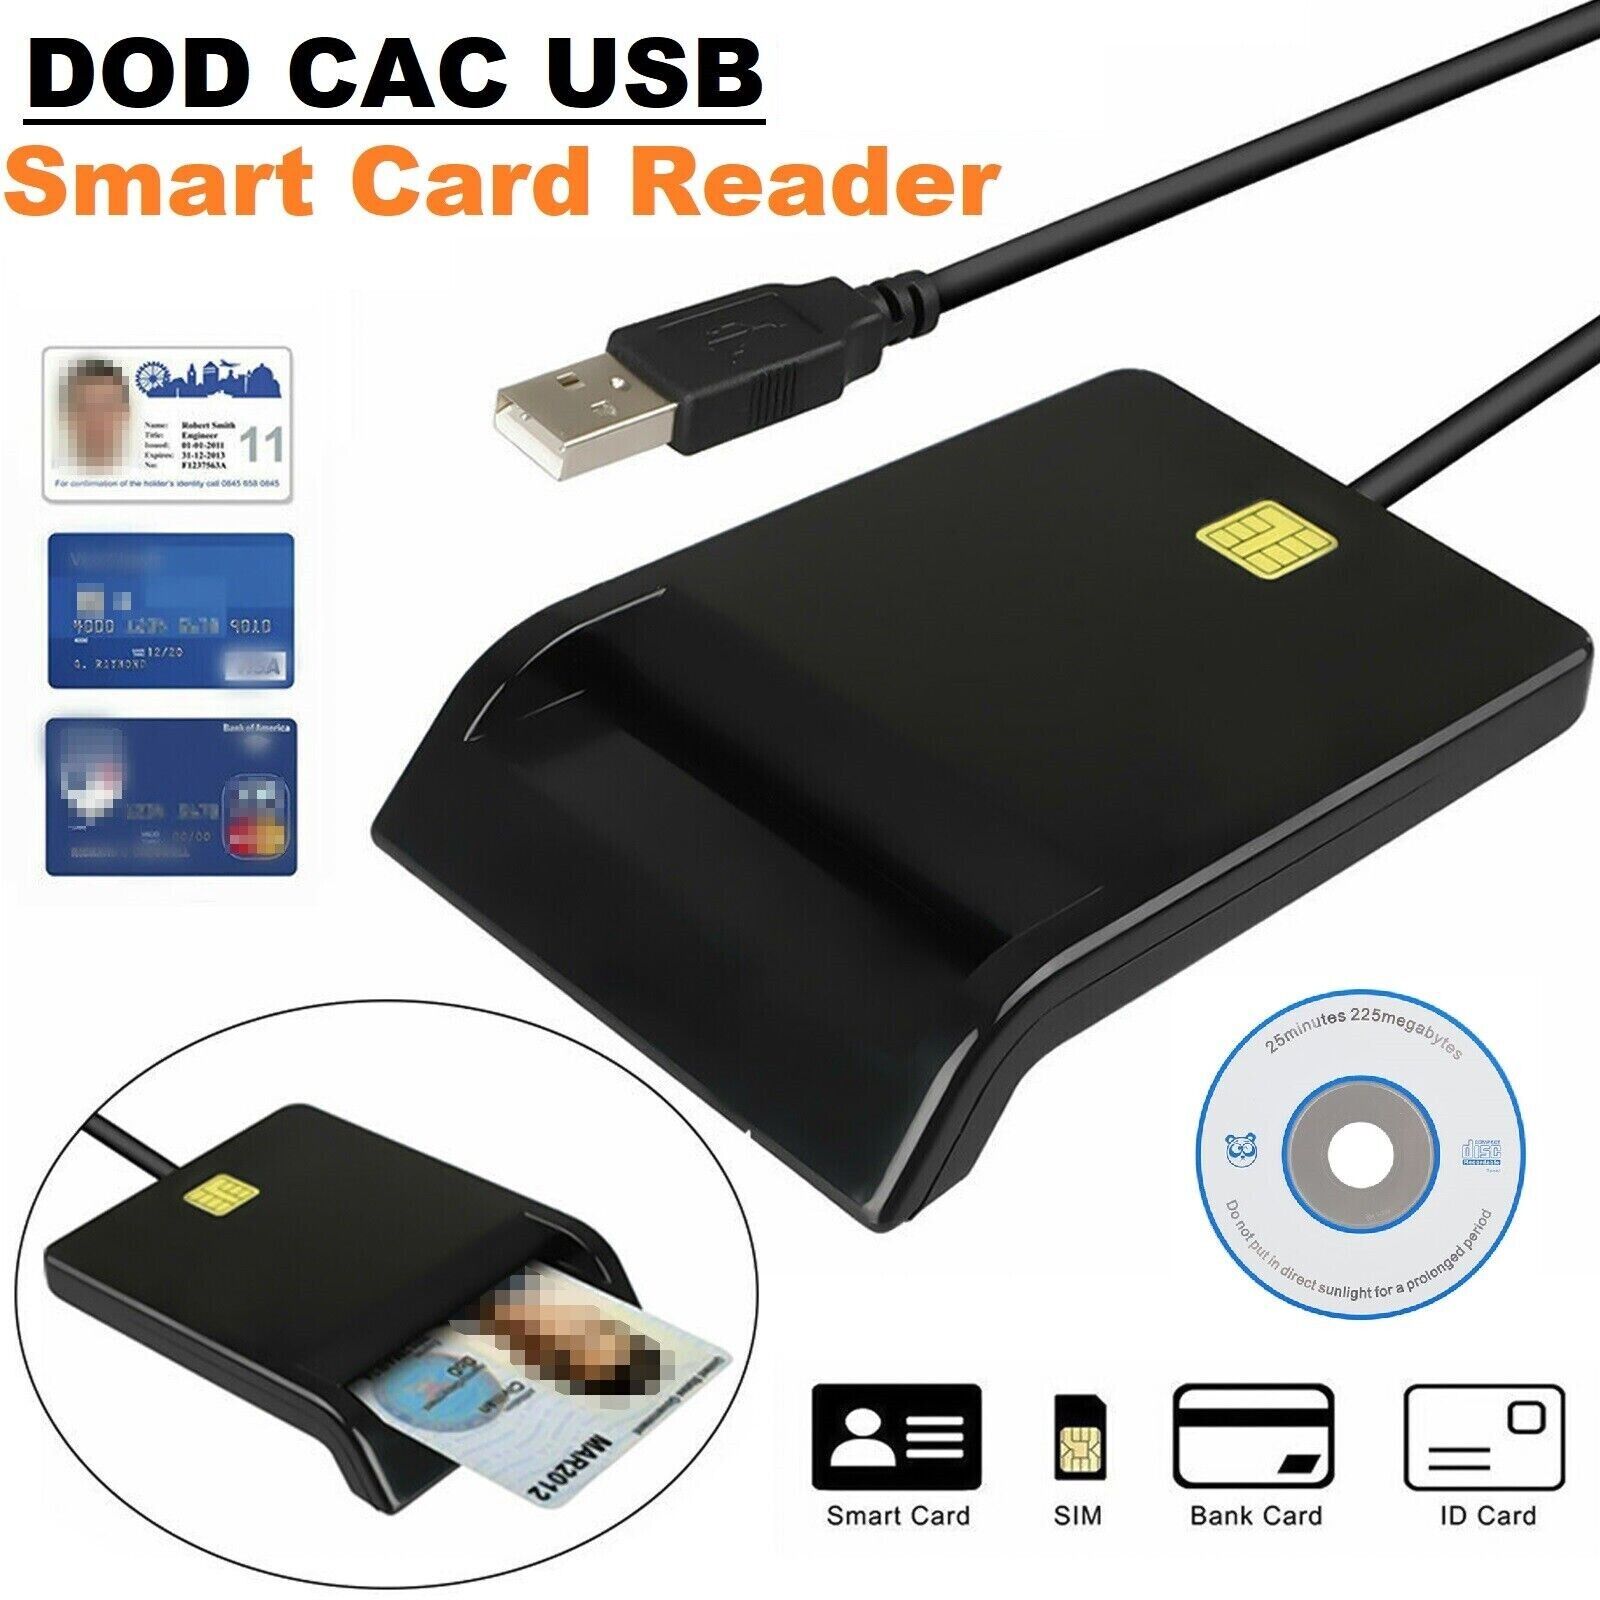 DOD Military USB 2.0 Common Access CAC Smart Card Reader for macOS Windows Linux